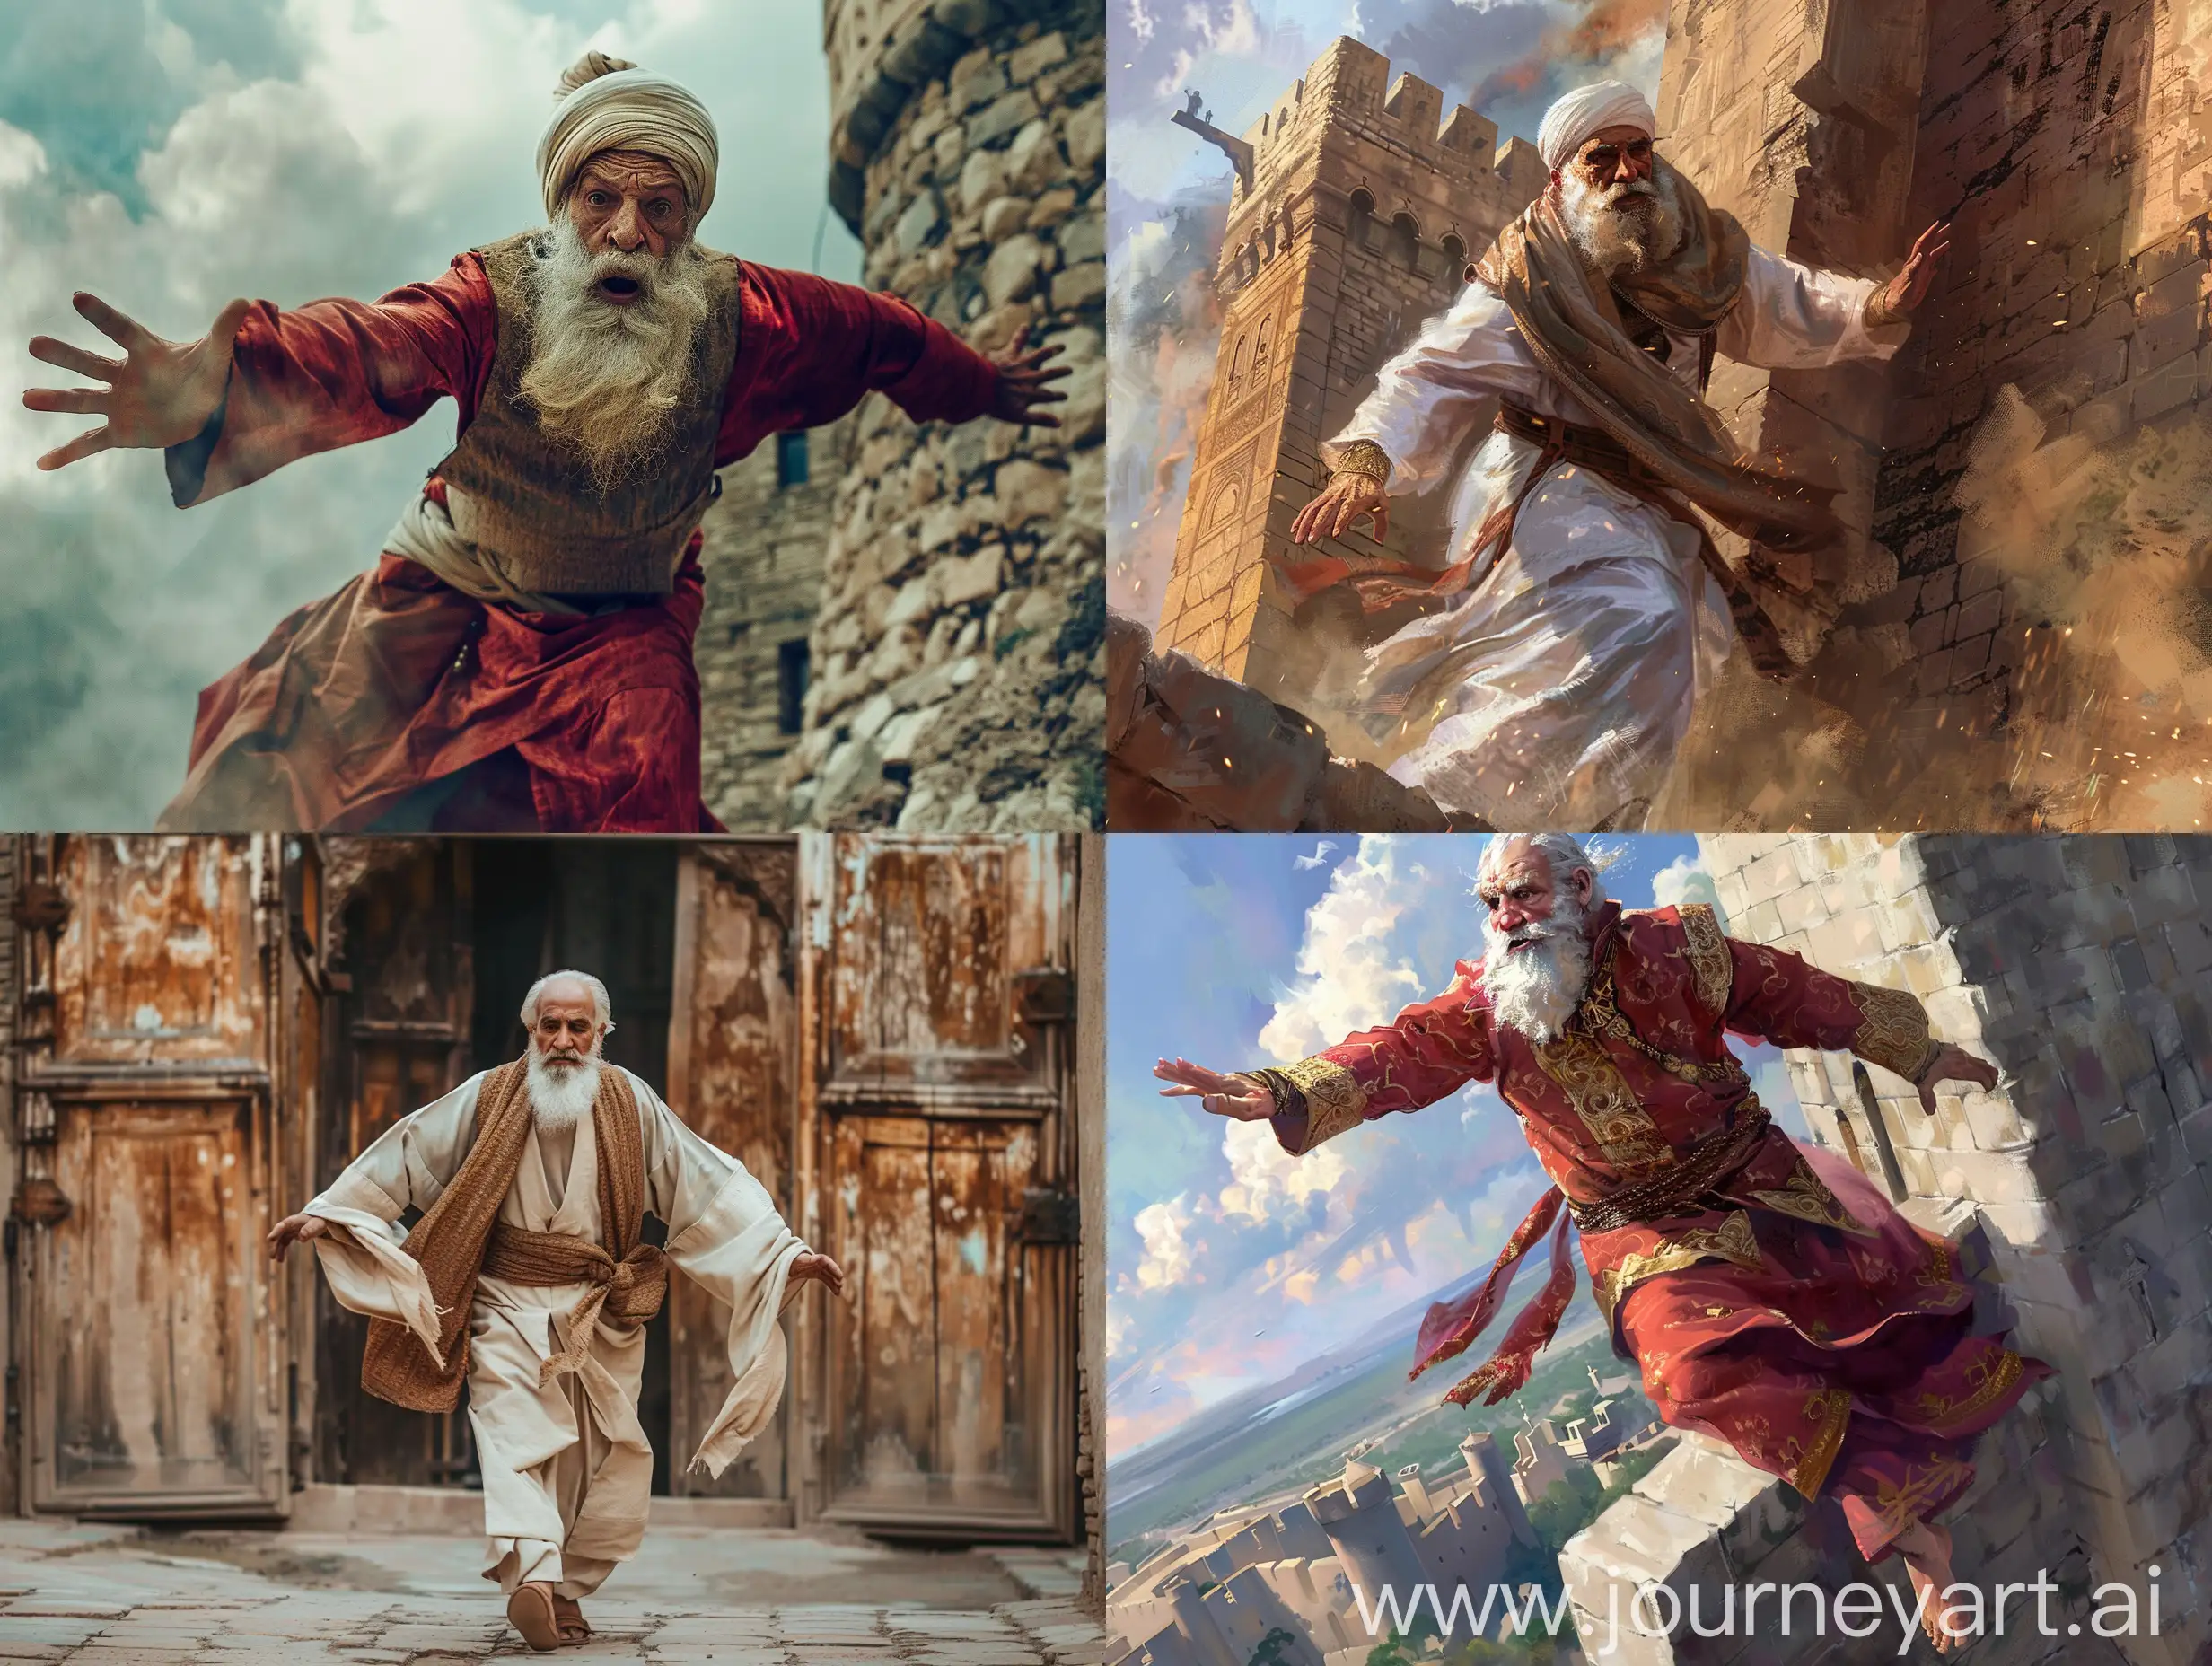 Escape-of-an-Evil-MiddleAged-Man-in-Traditional-Persian-Clothes-from-an-Old-Castle-Prison